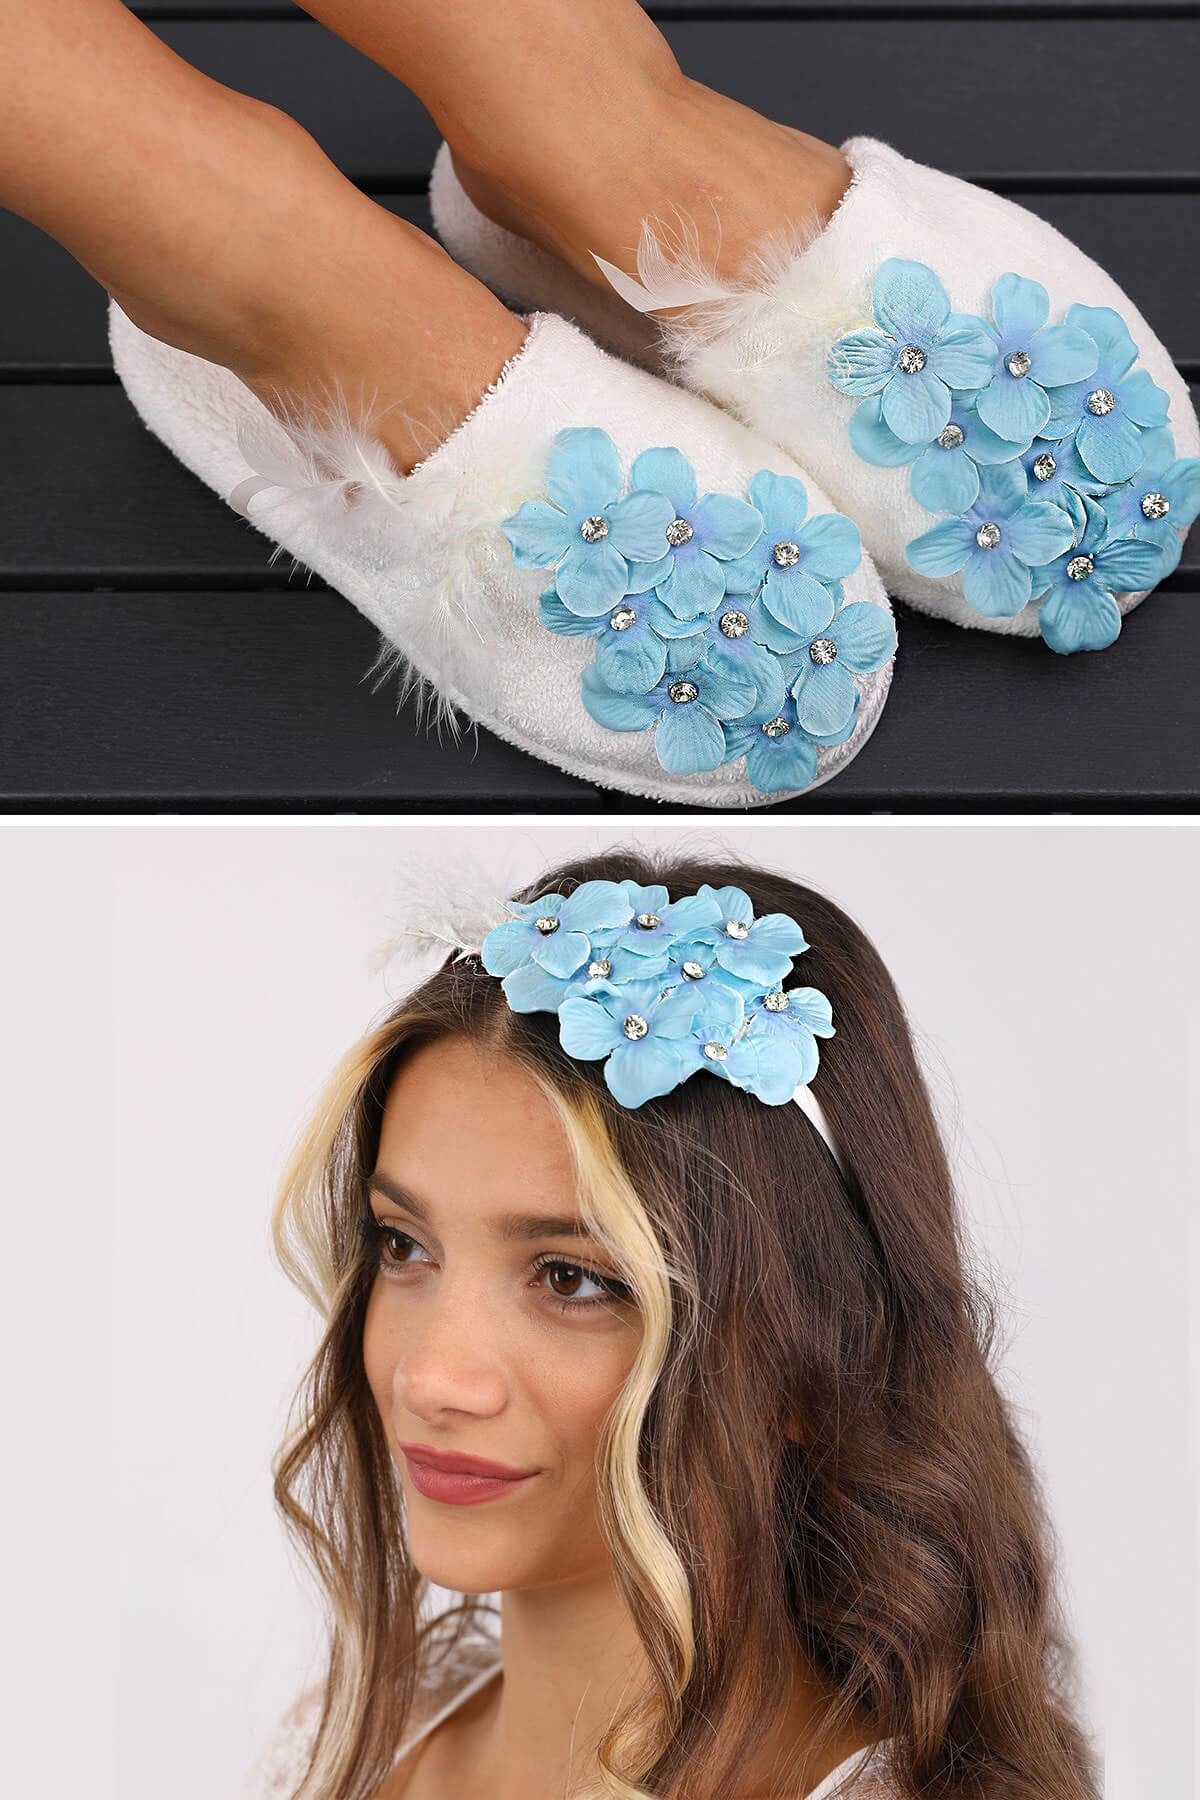 Shopymommy 757103 Violet Flowered Maternity Crown & Maternity Slippers Set Turquoise